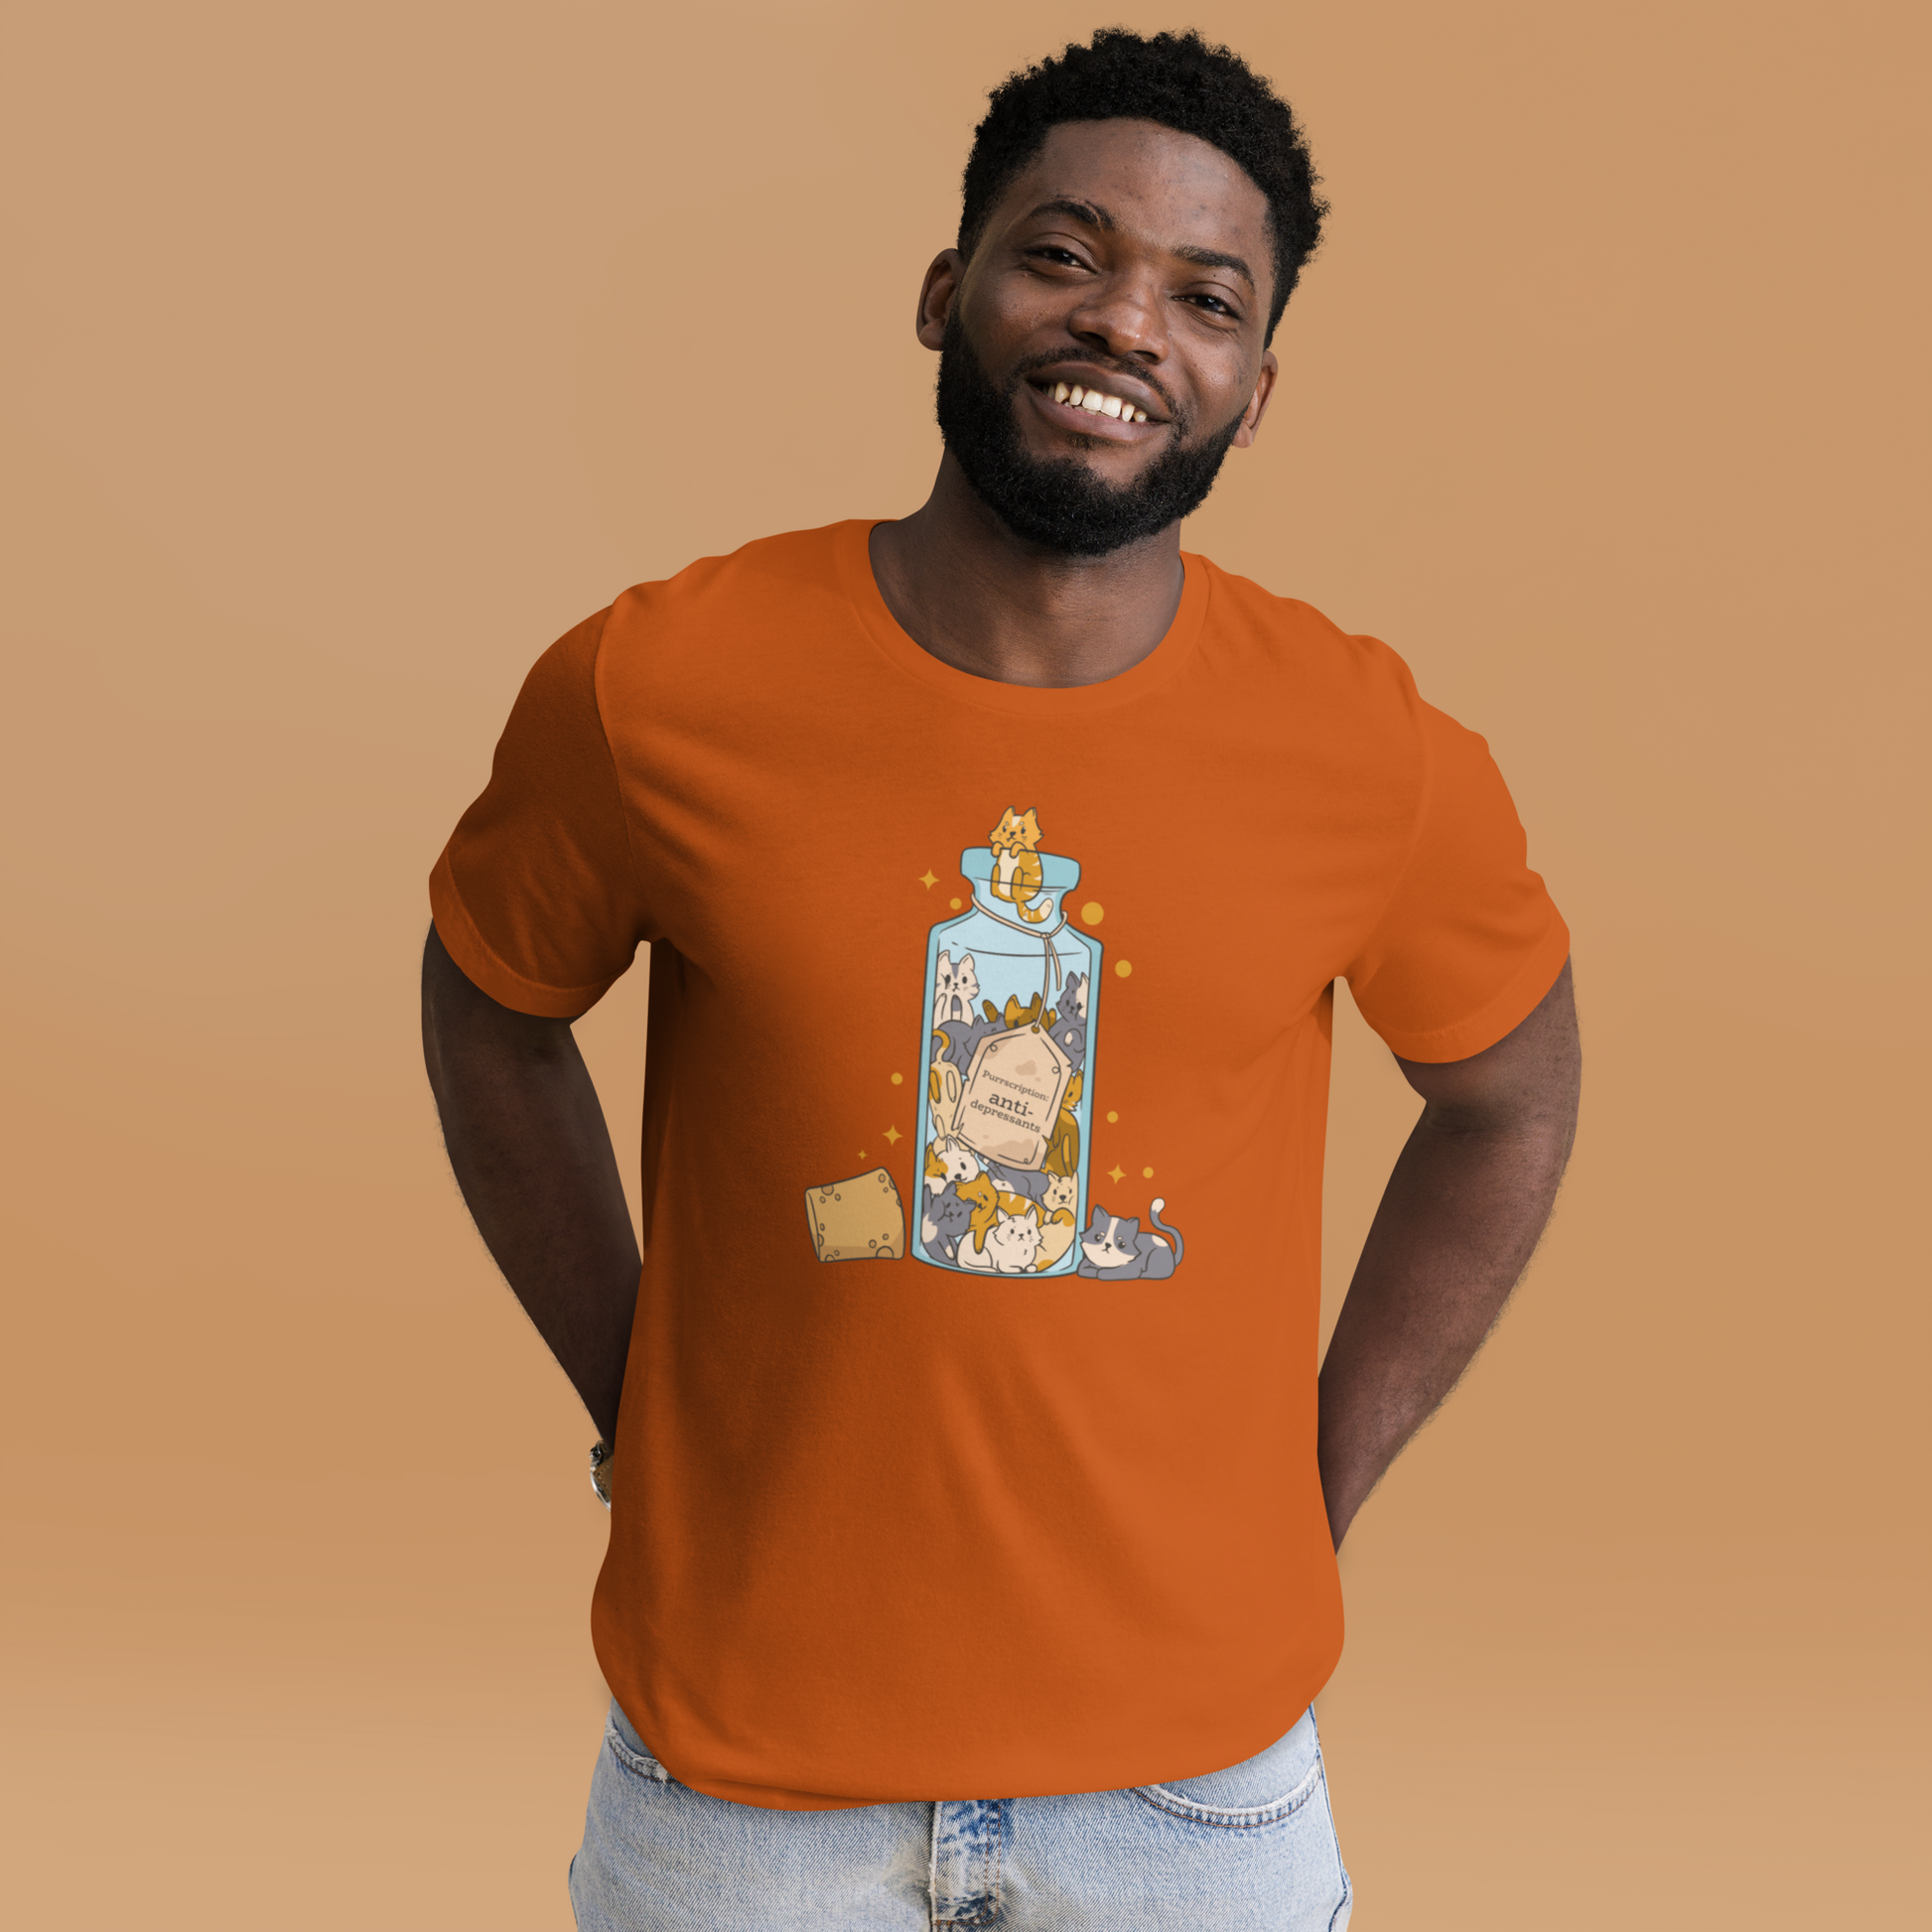 Smiling man wearing a Autumn Colored Premium Cat T-Shirt featuring a funny Anti-Depressants graphic on the chest - Cute Graphic Cat Tees - Boozy Fox